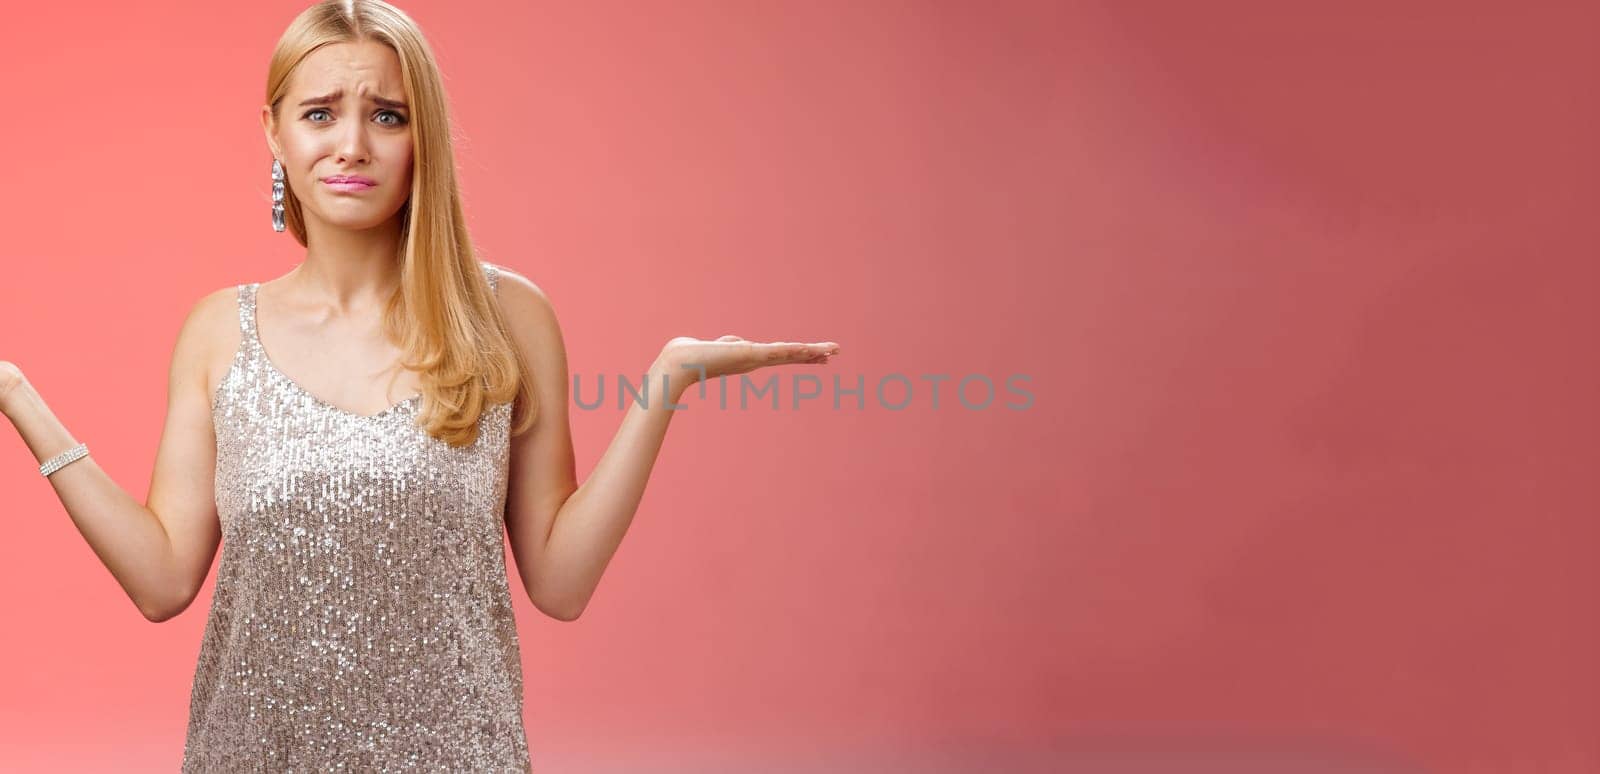 Nervous unsure doubtful cute blond woman struggle make decision shrugging pointing sideways frowning upset standing insecure feel pressure cannot decide choice make, frustrated red background.